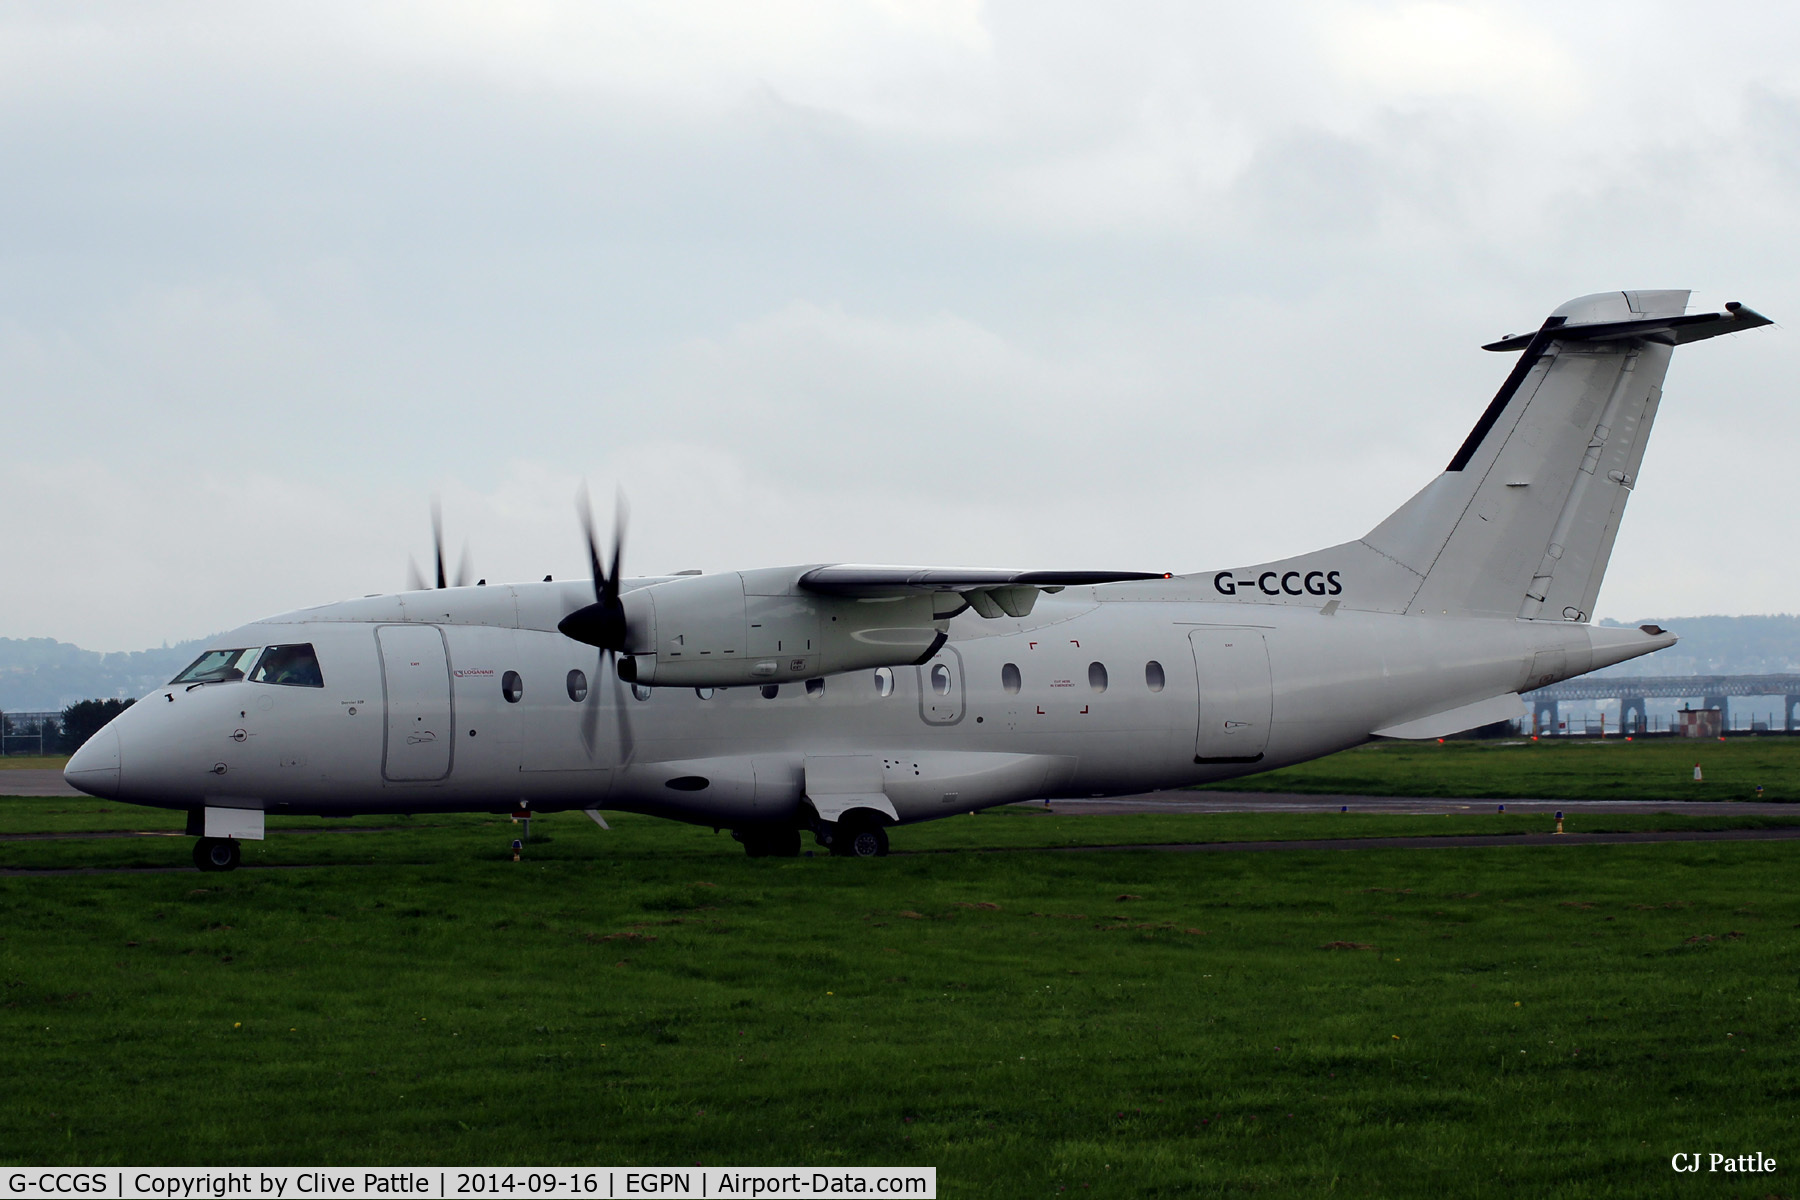 G-CCGS, 1998 Dornier 328-100 C/N 3101, Unpainted G-CCGS undertakes engine tests at the Flybe maintenance facility at Dundee